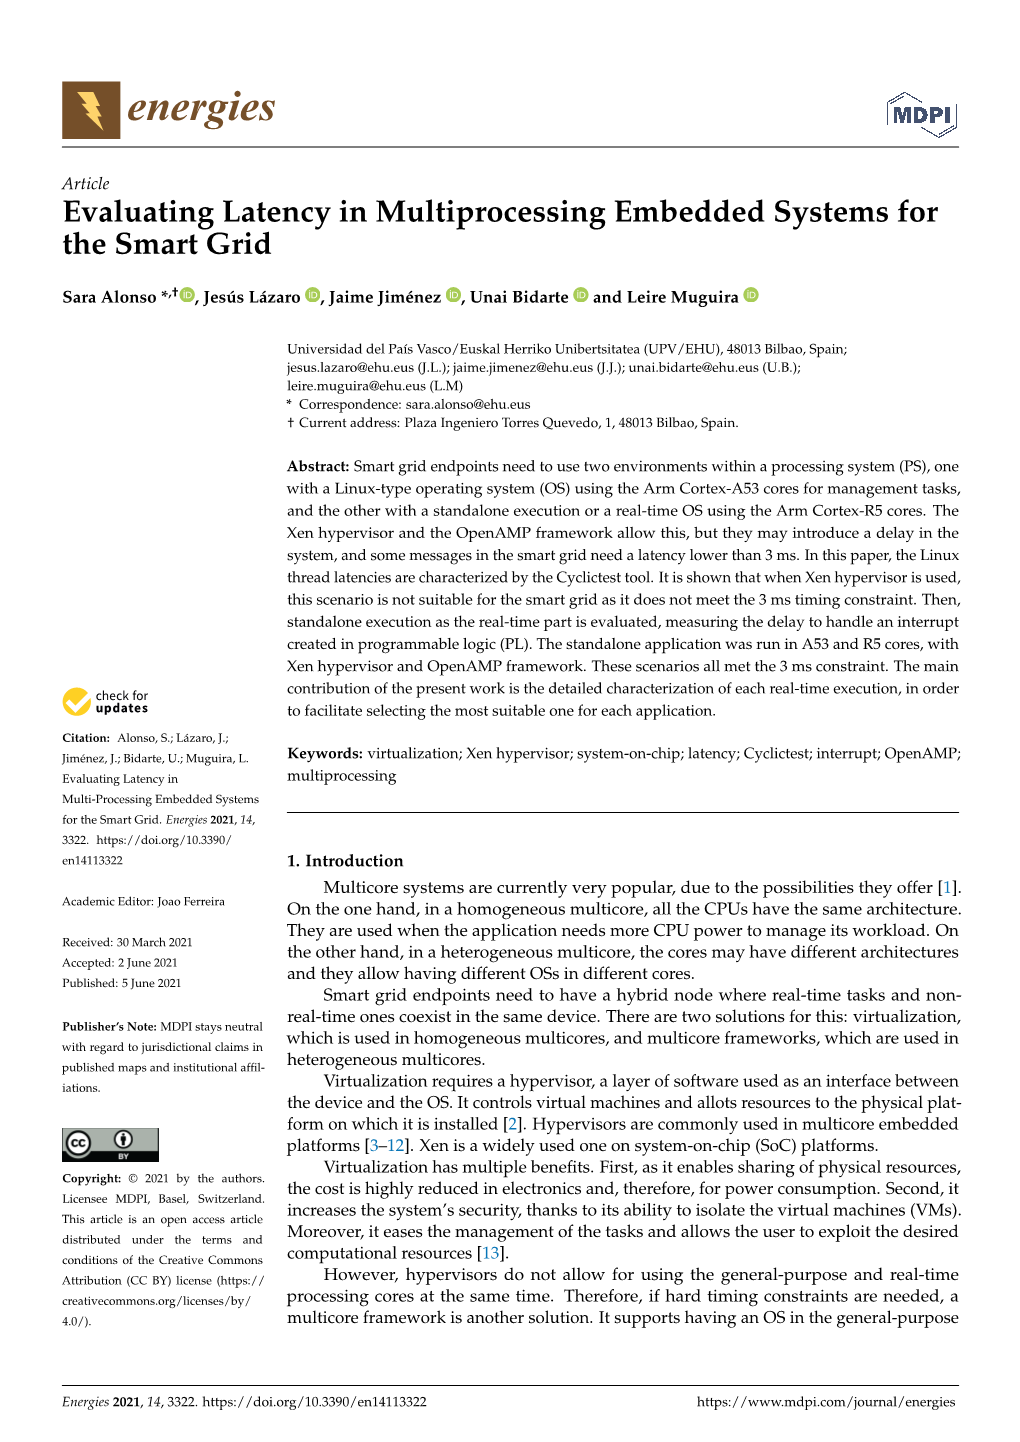 Evaluating Latency in Multiprocessing Embedded Systems for the Smart Grid